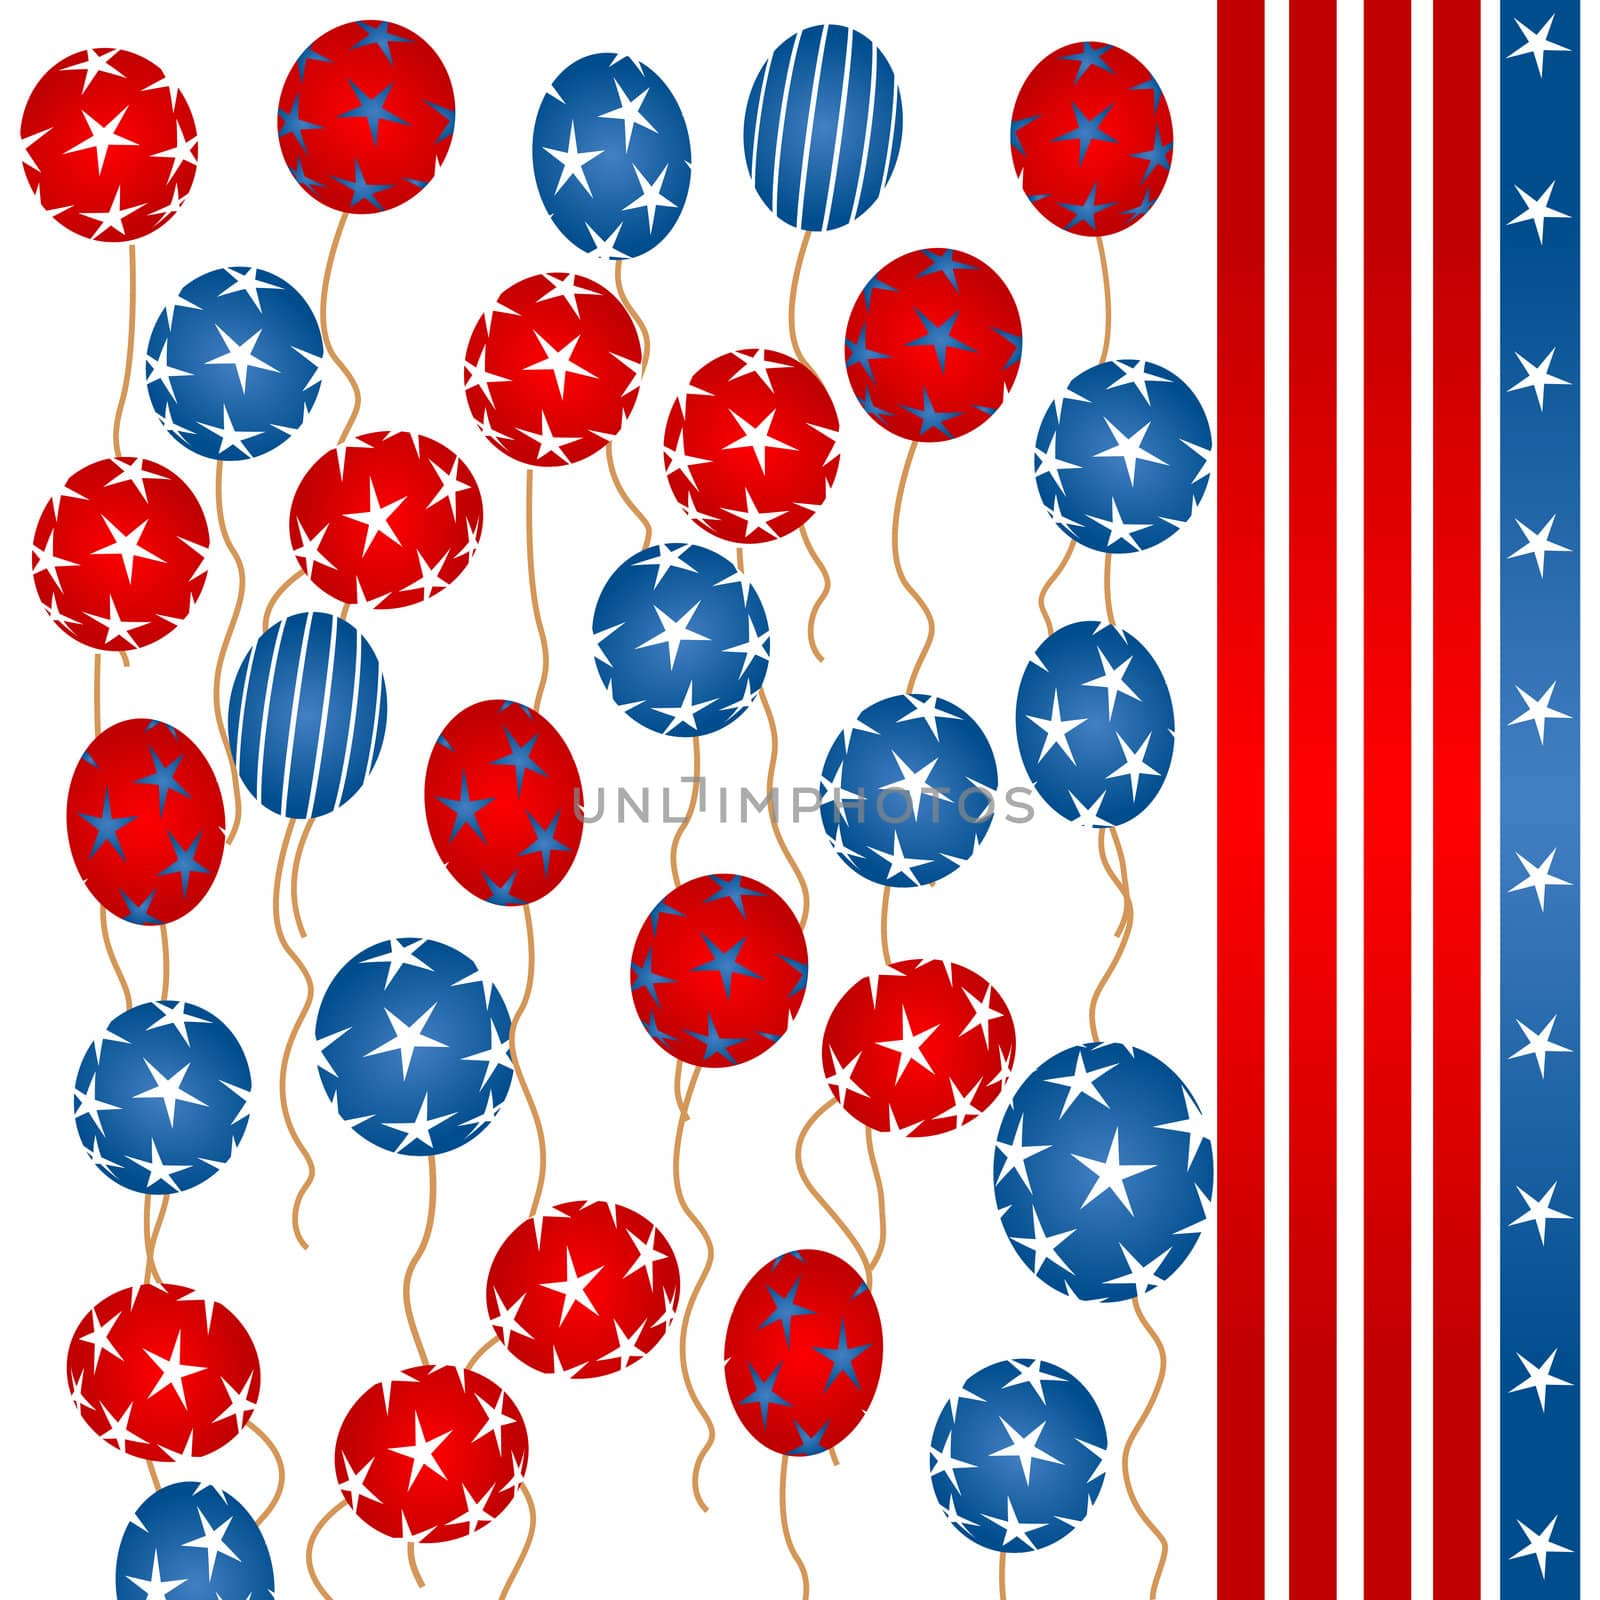 Stars and stripes balloons by Lirch